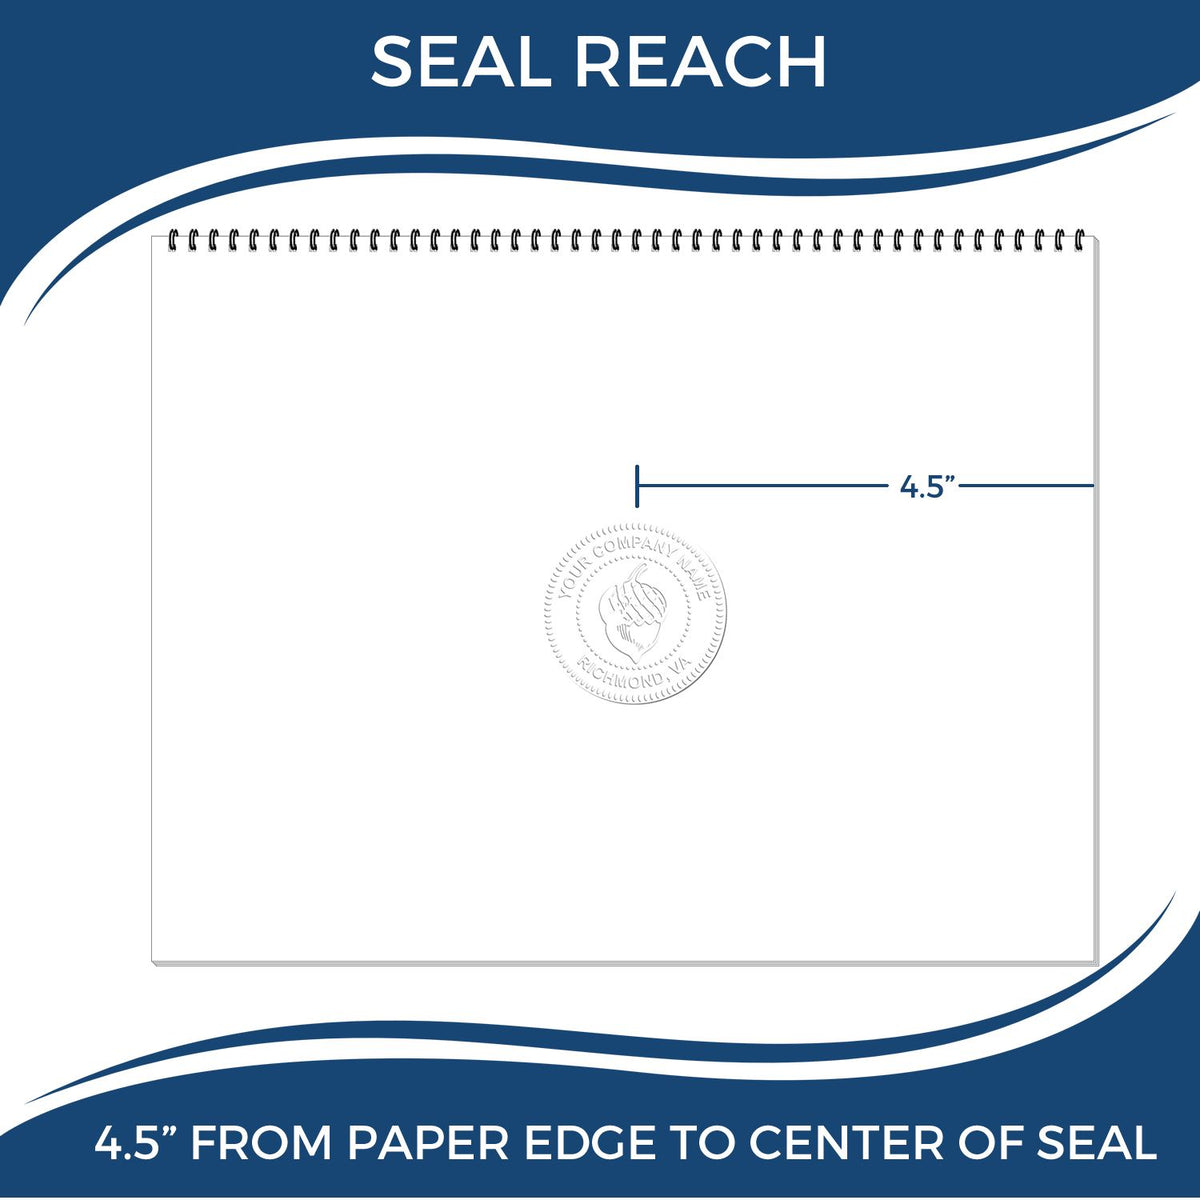 An infographic showing the seal reach which is represented by a ruler and a miniature seal image of the State of Massachusetts Extended Long Reach Engineer Seal